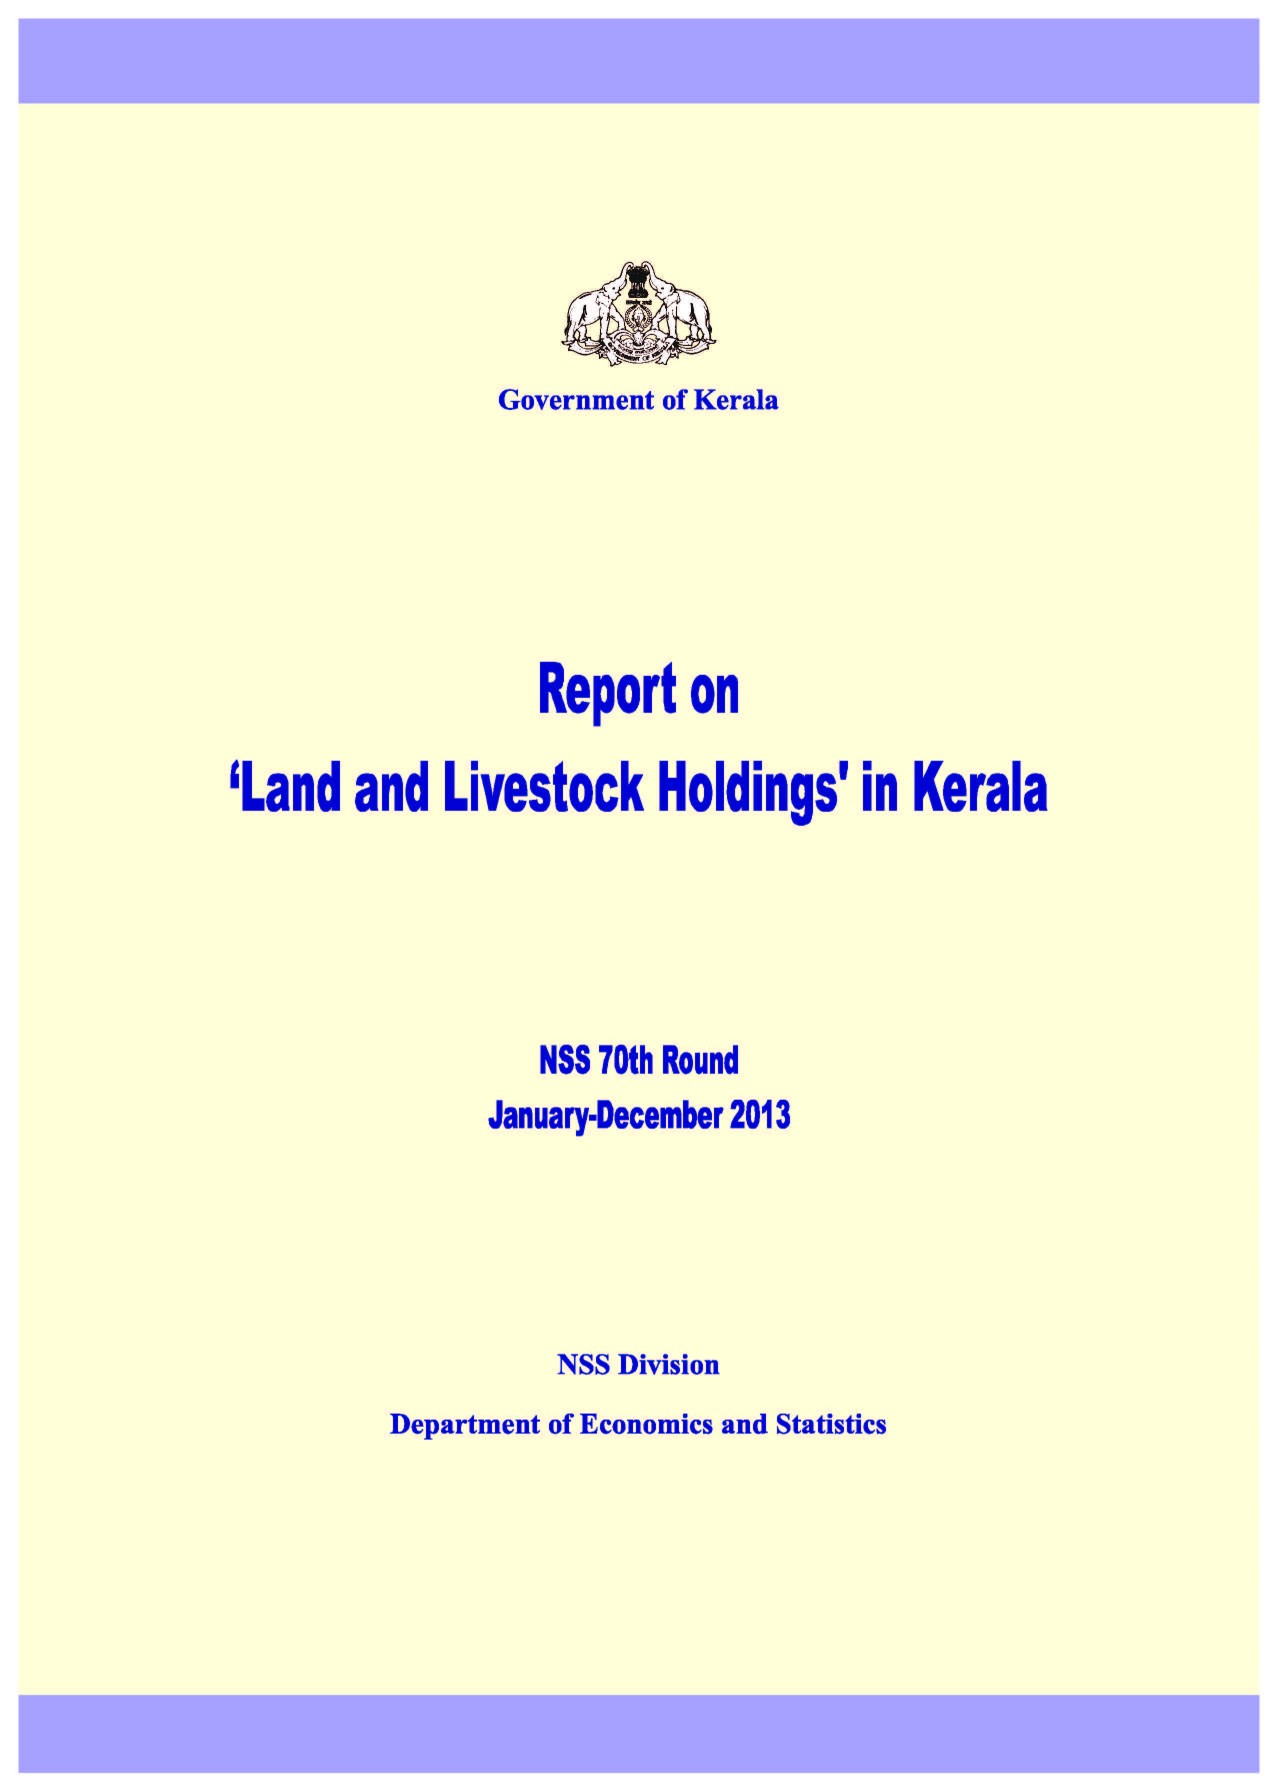 NSS 70th round - Report on Land and Livestock Holdings in Kerala